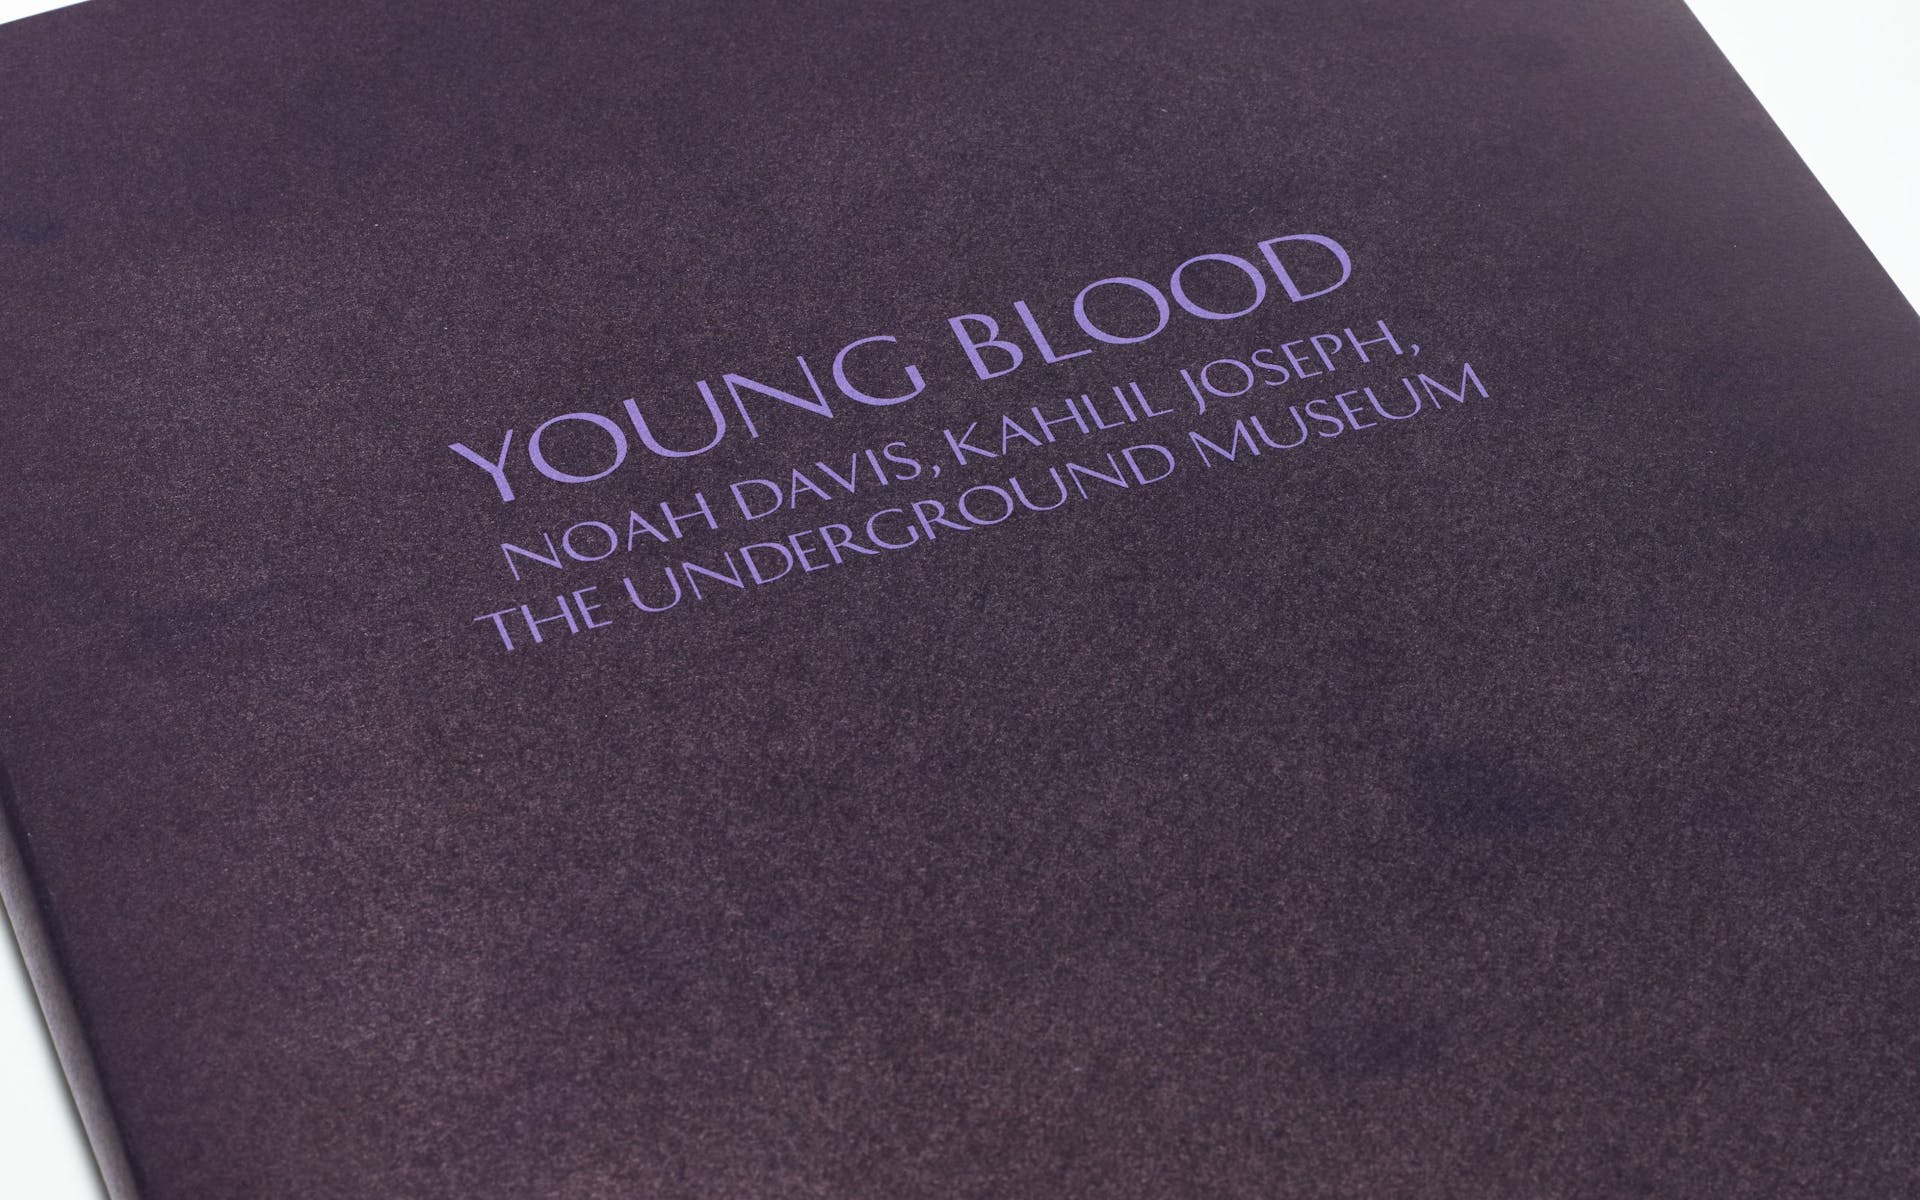 Closeup image of purple typography-only book cover for "Young Blood"